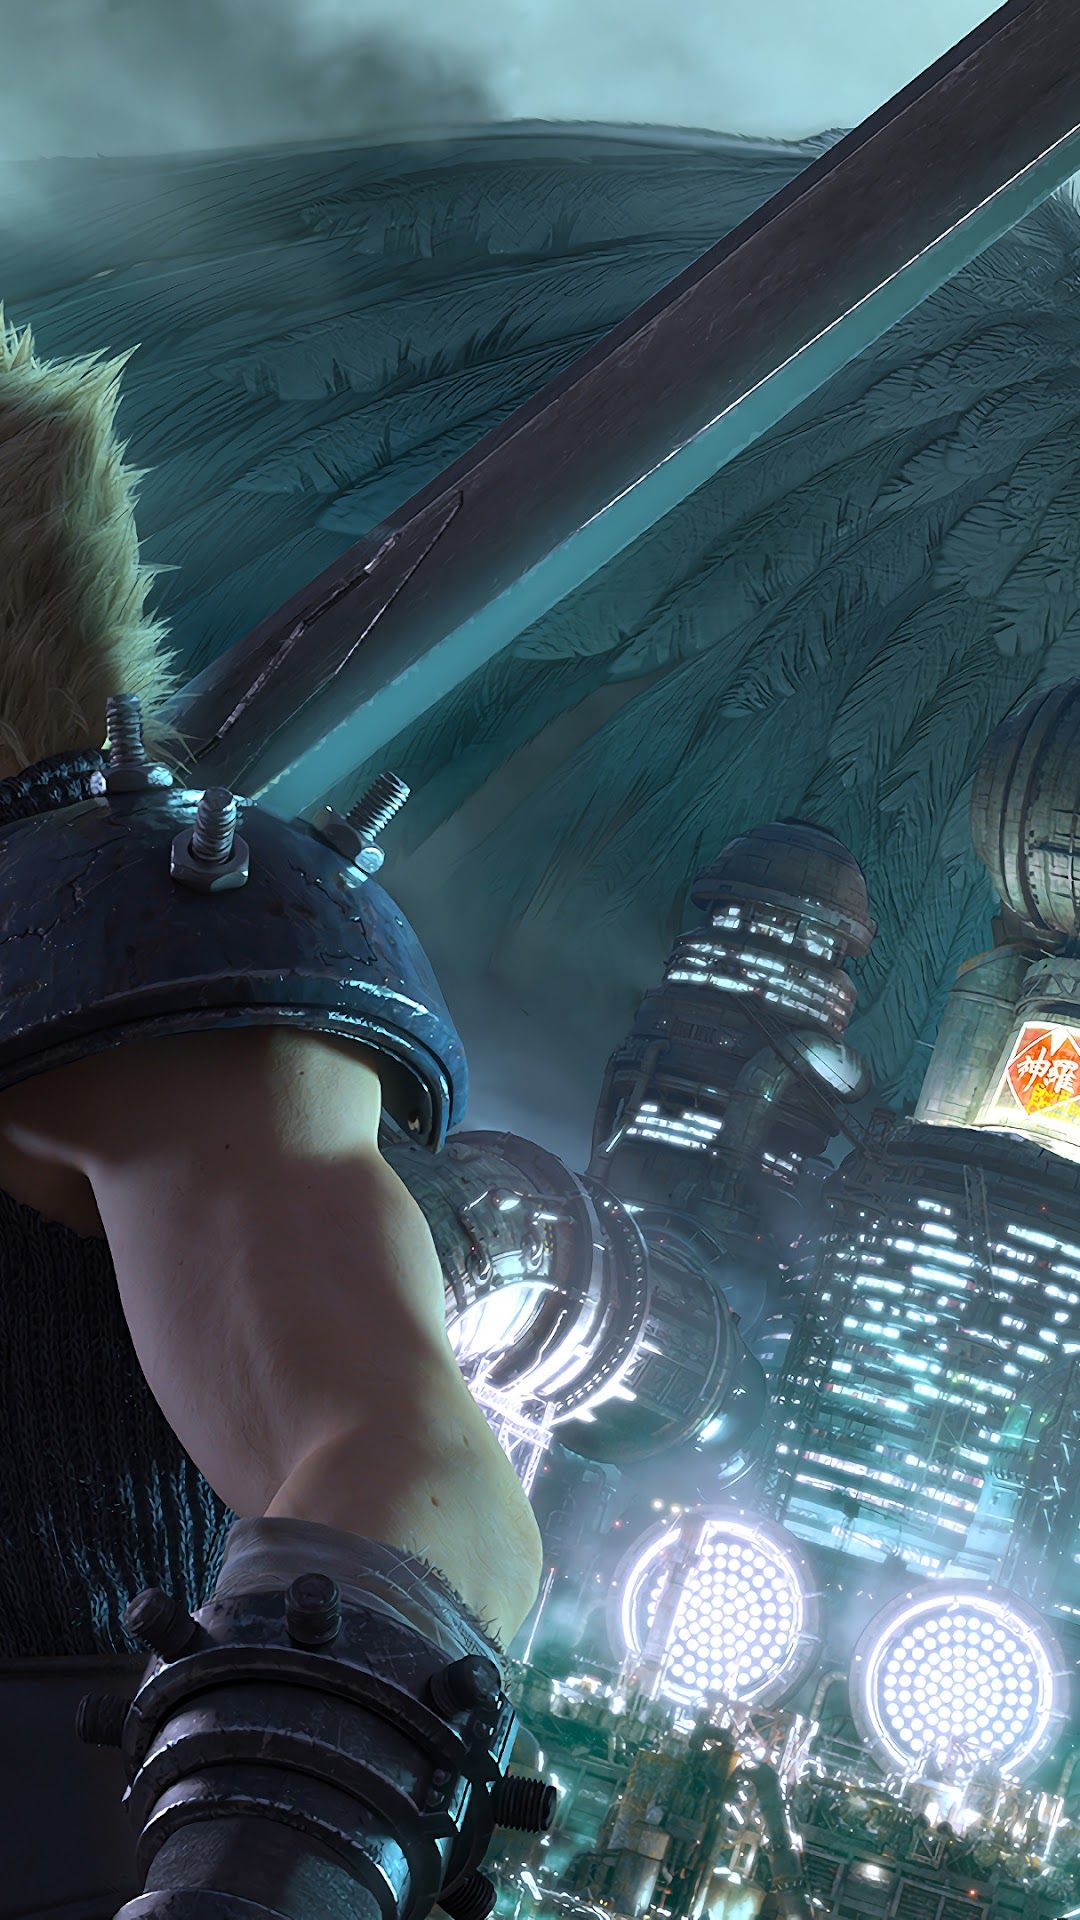 Final Fantasy 7 Remake, Cloud Strife, Sephiroth phone HD Wallpaper, Image, Background, Photo and Picture. Mocah HD Wallpaper